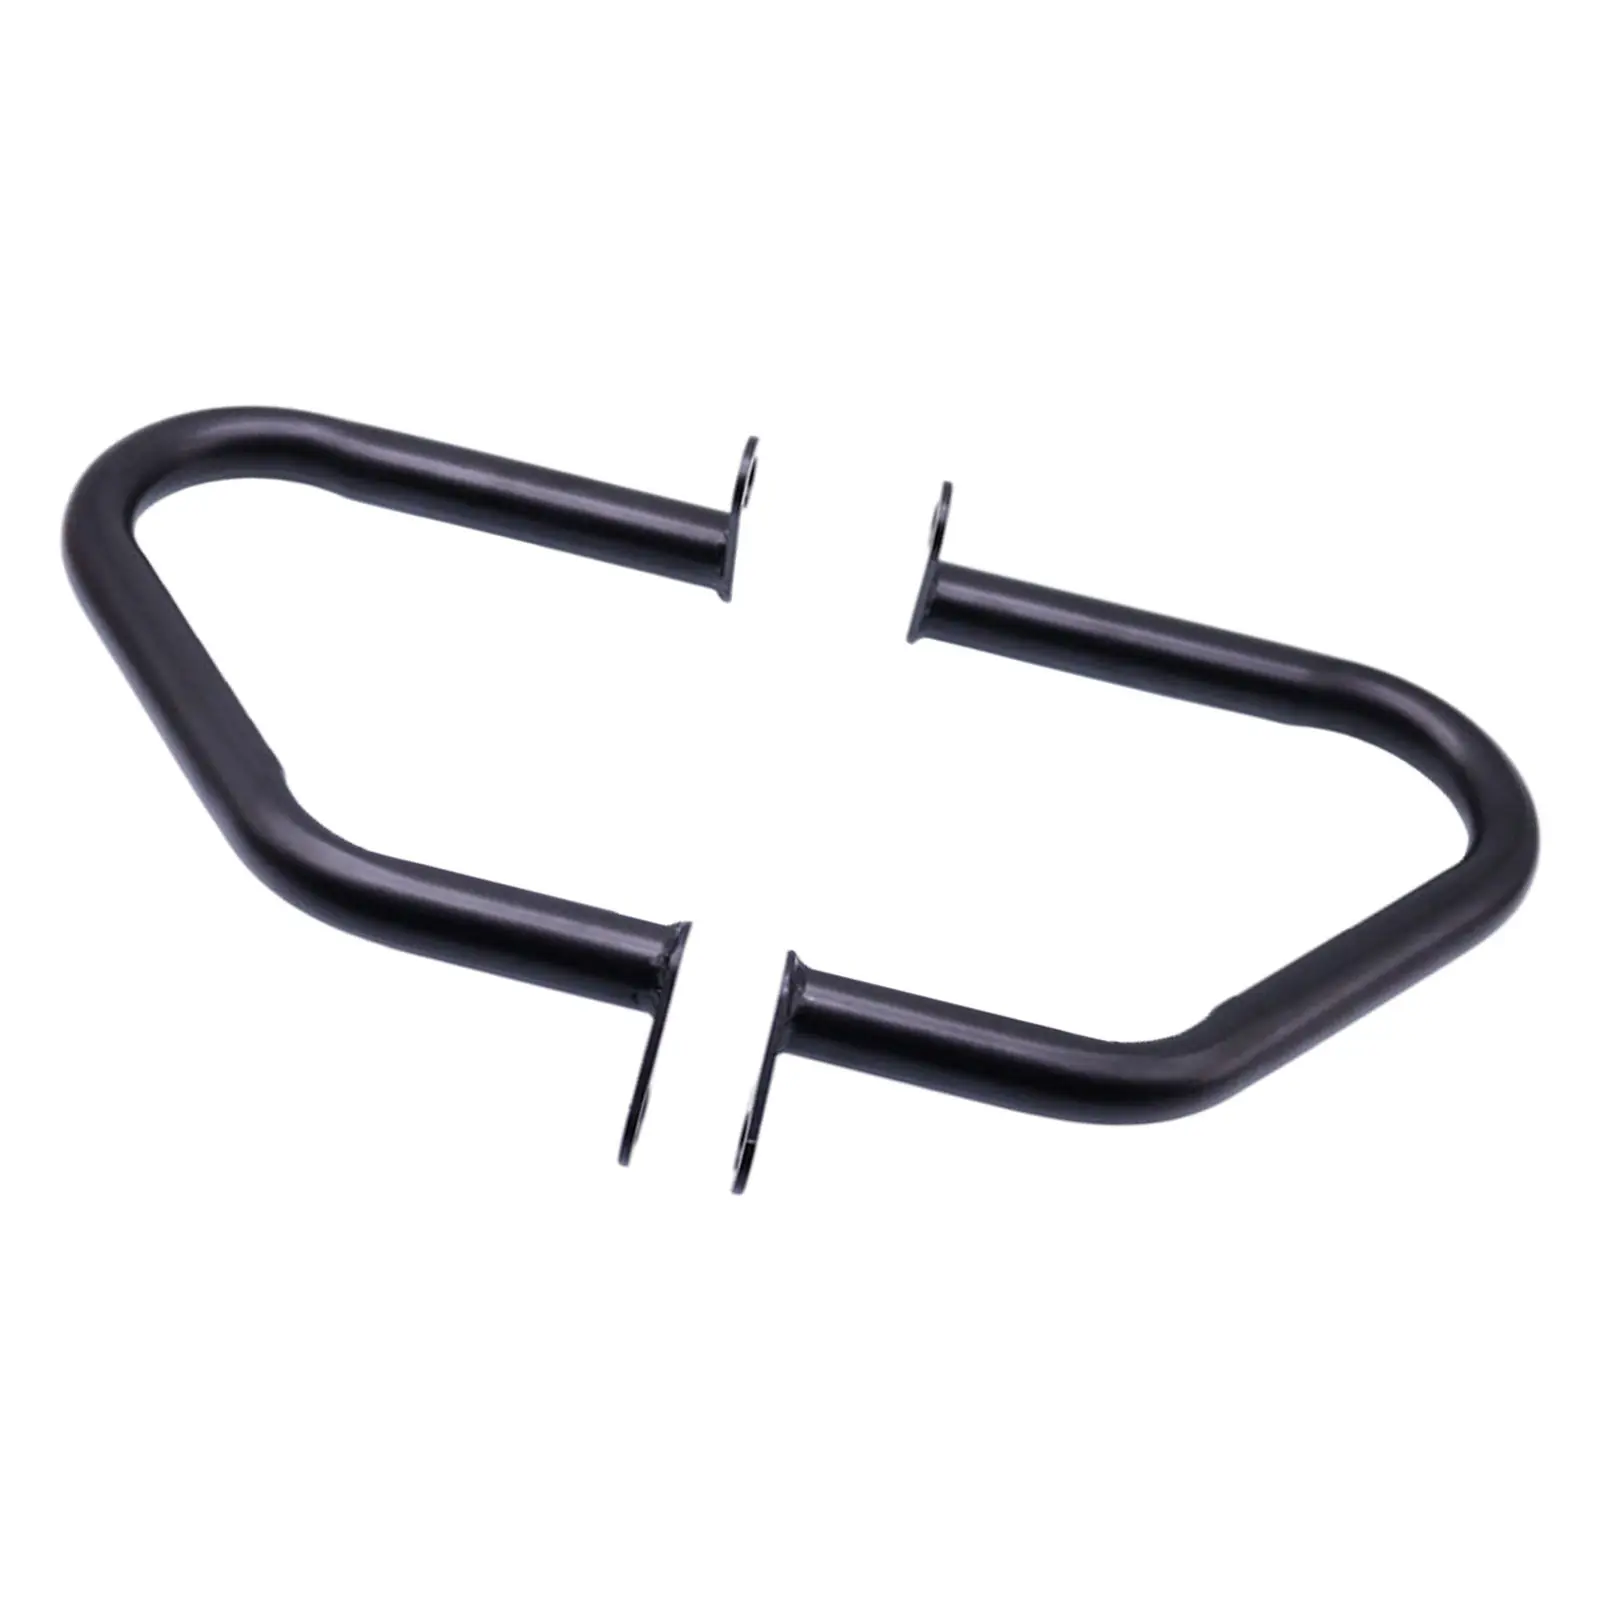 Steel Engine Guard Crash Bars Replacement fits for T120 Thruxton